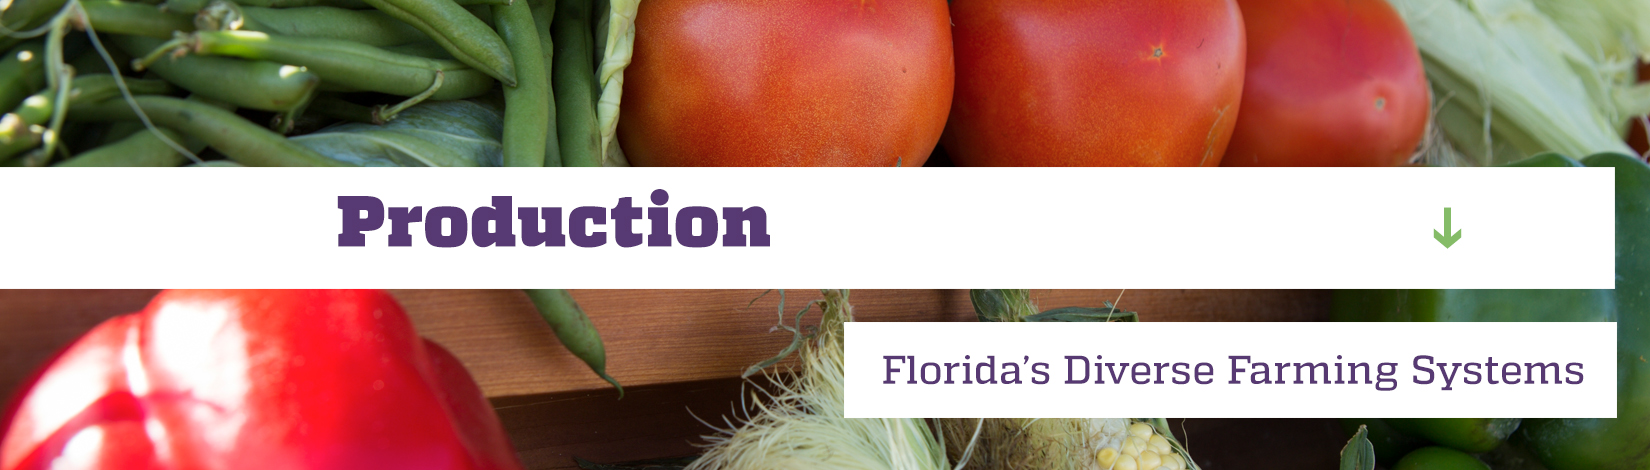 Production-Managing Florida’s Diverse Farming Systems